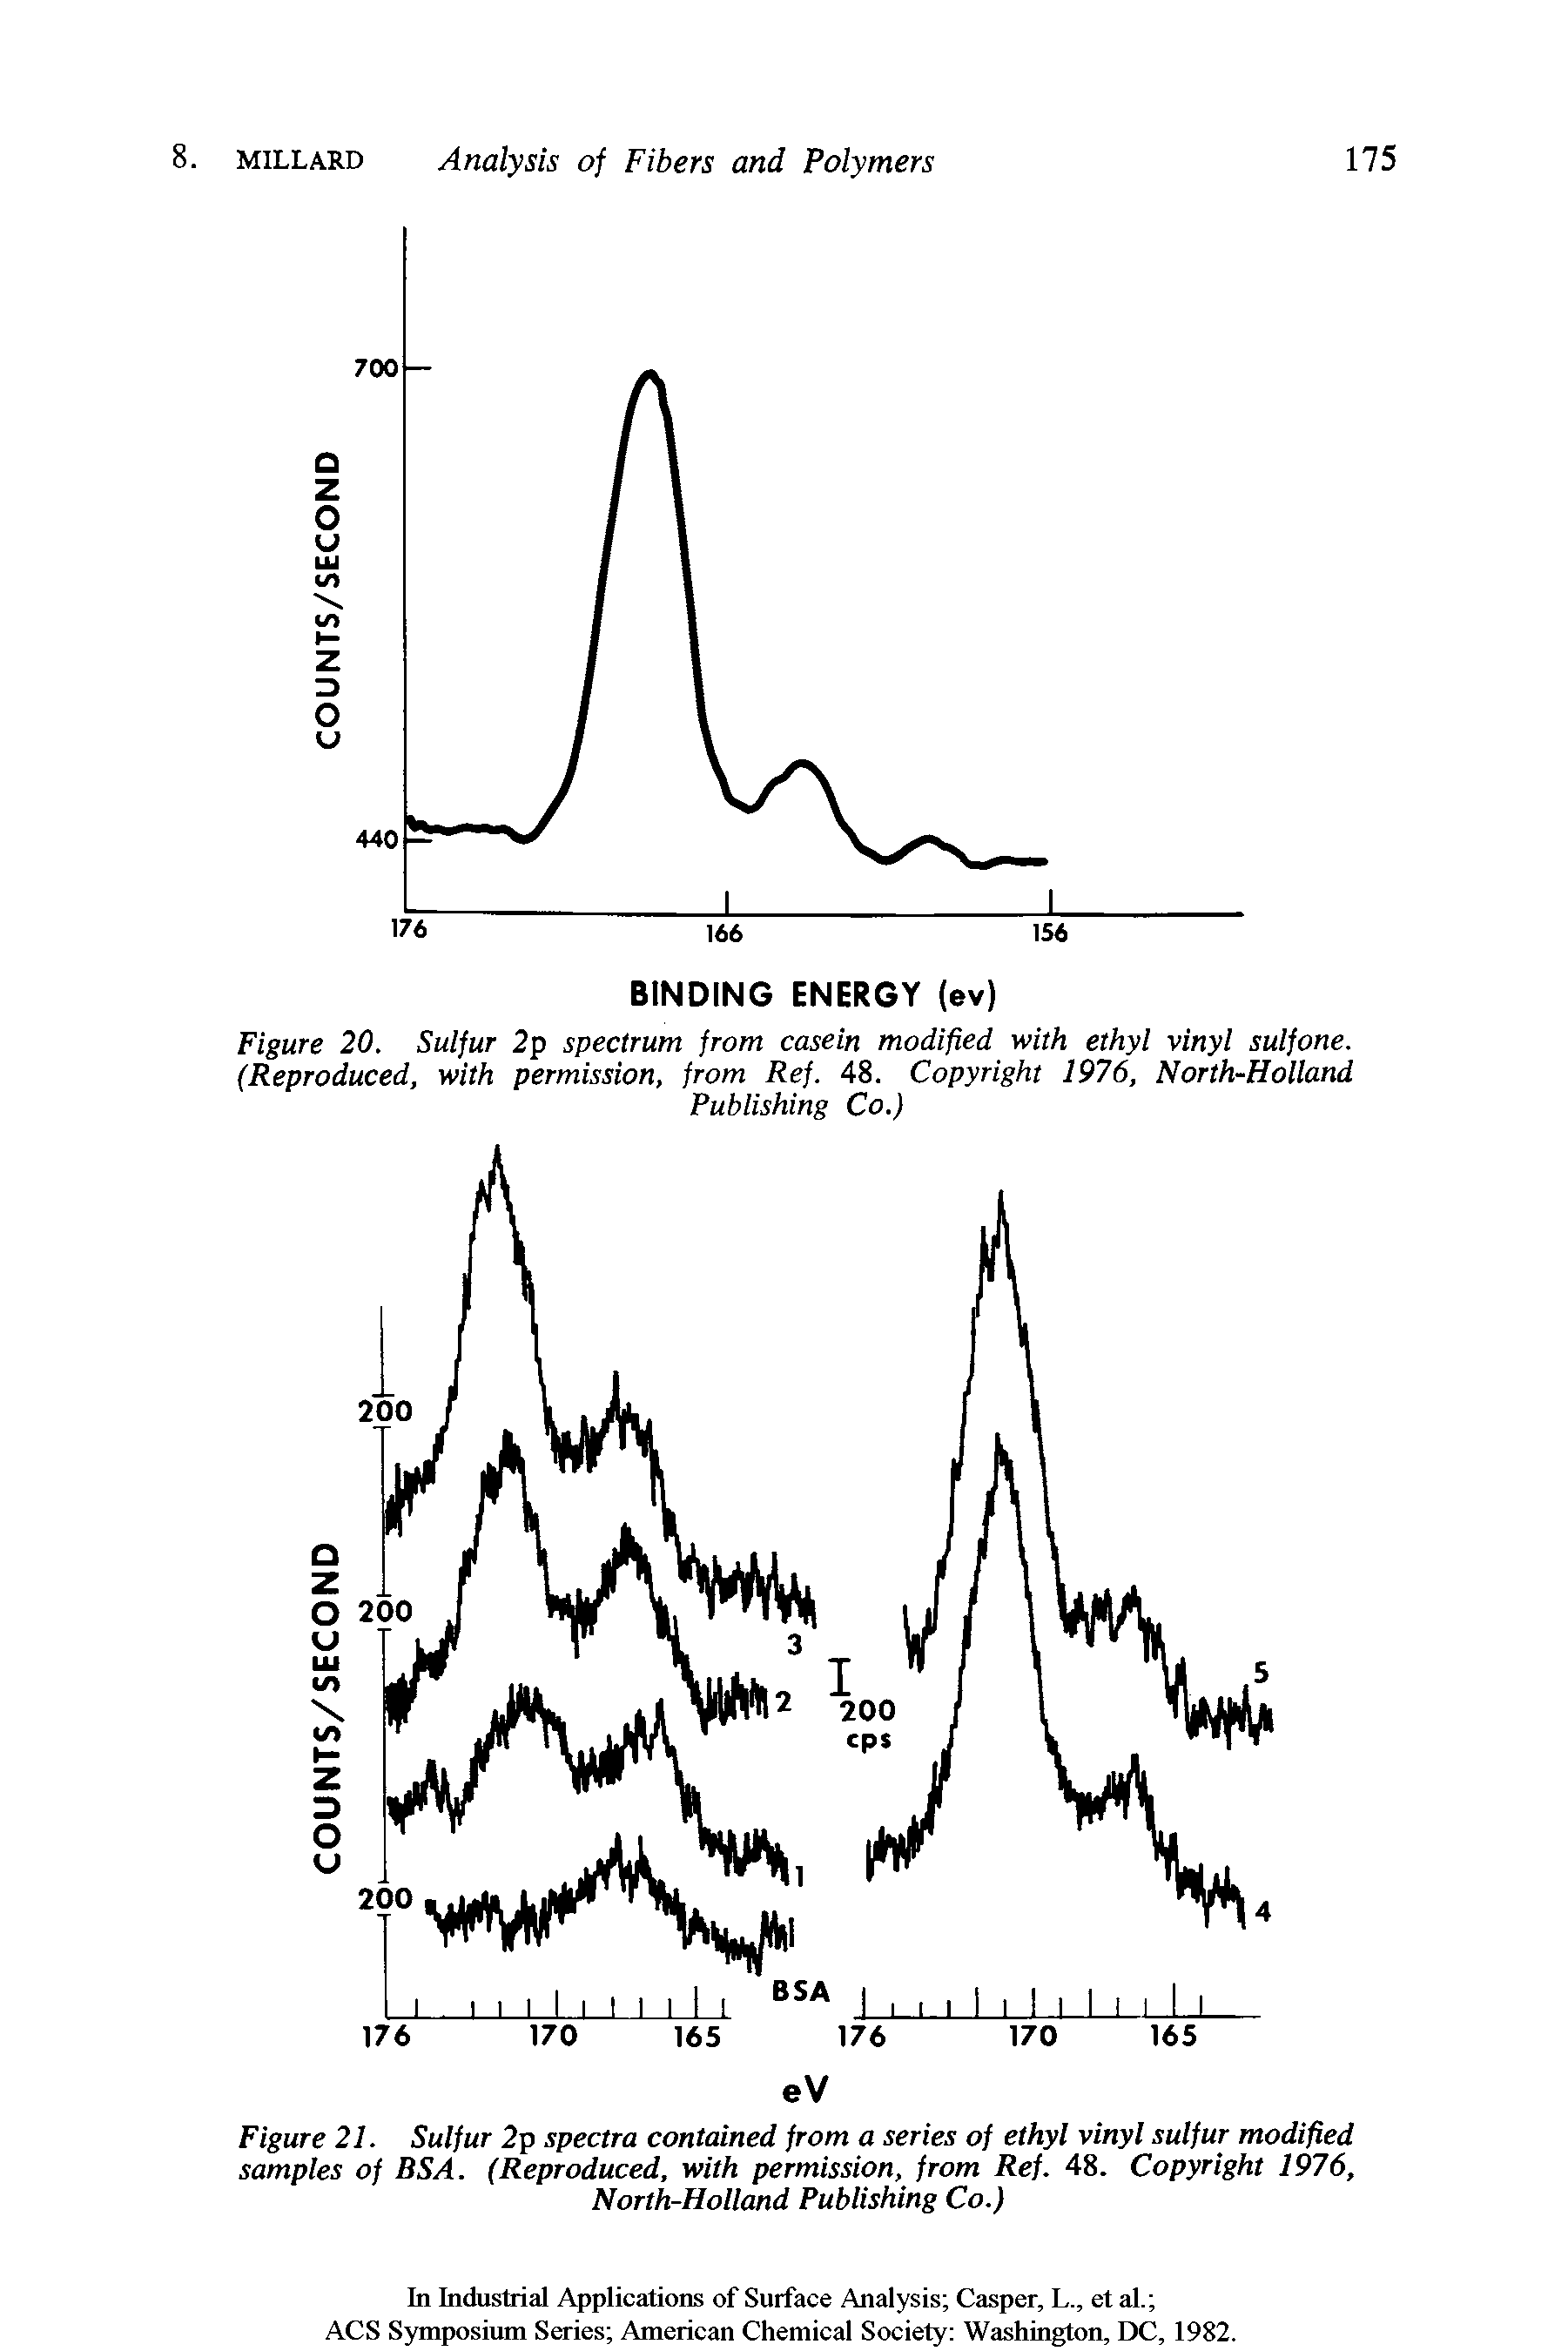 Figure 20. Sulfur 2p spectrum from casein modified with ethyl vinyl sulfone. (Reproduced, with permission, from Ref. 48. Copyright 1976, North-Holland...